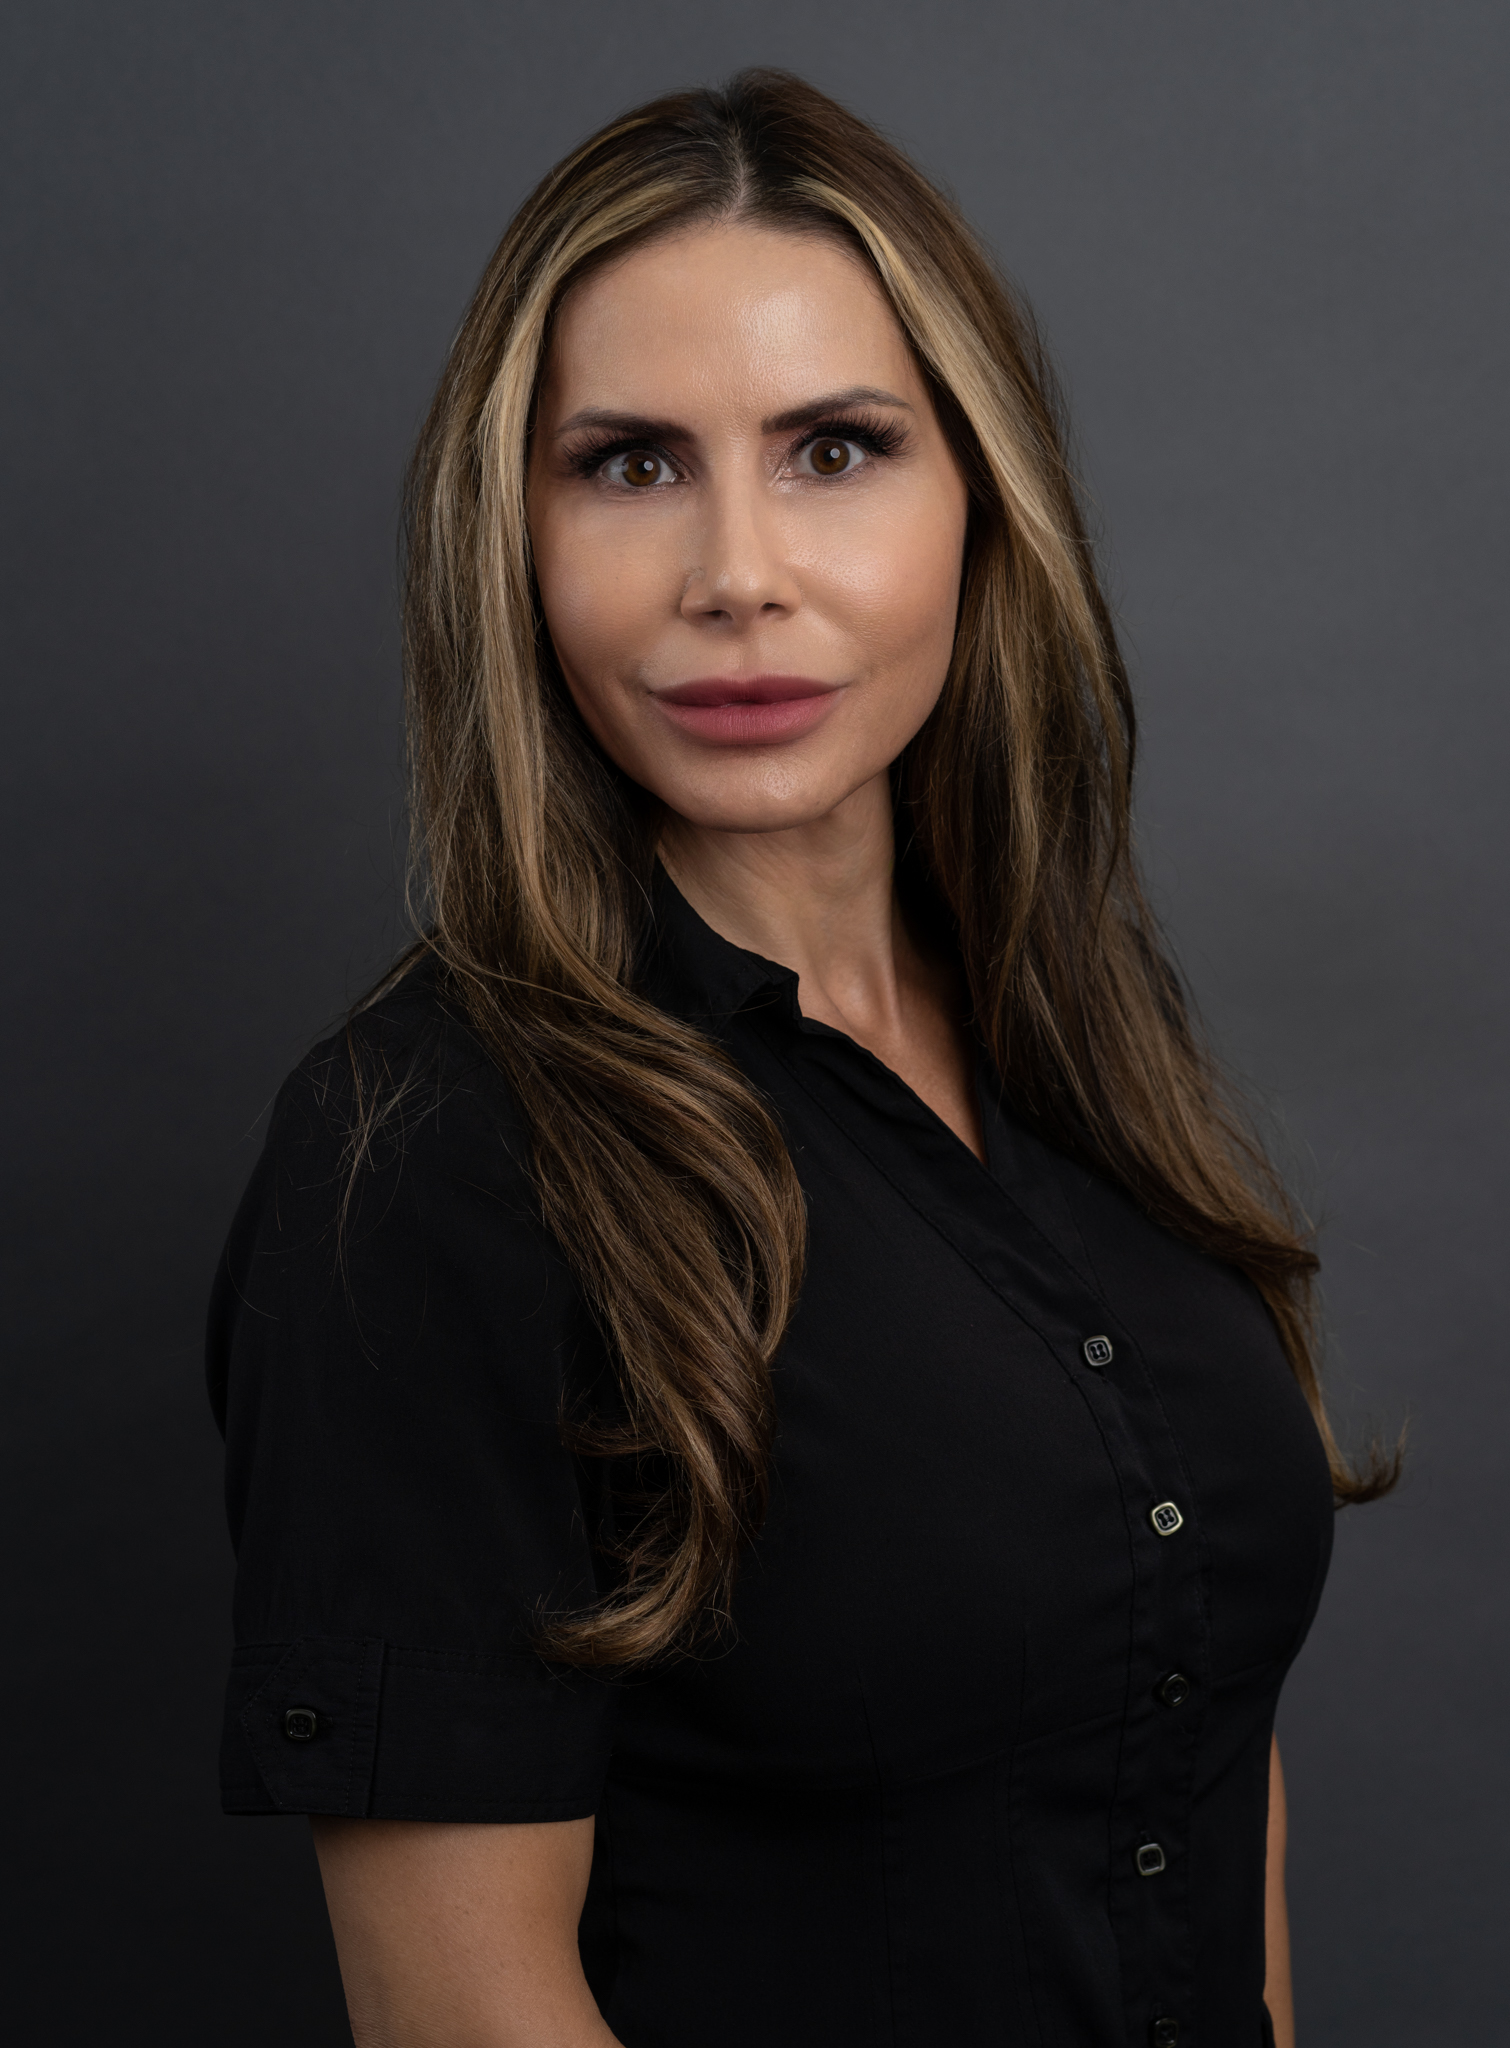 Heather, Aesthetician & CoolSculpting Expert